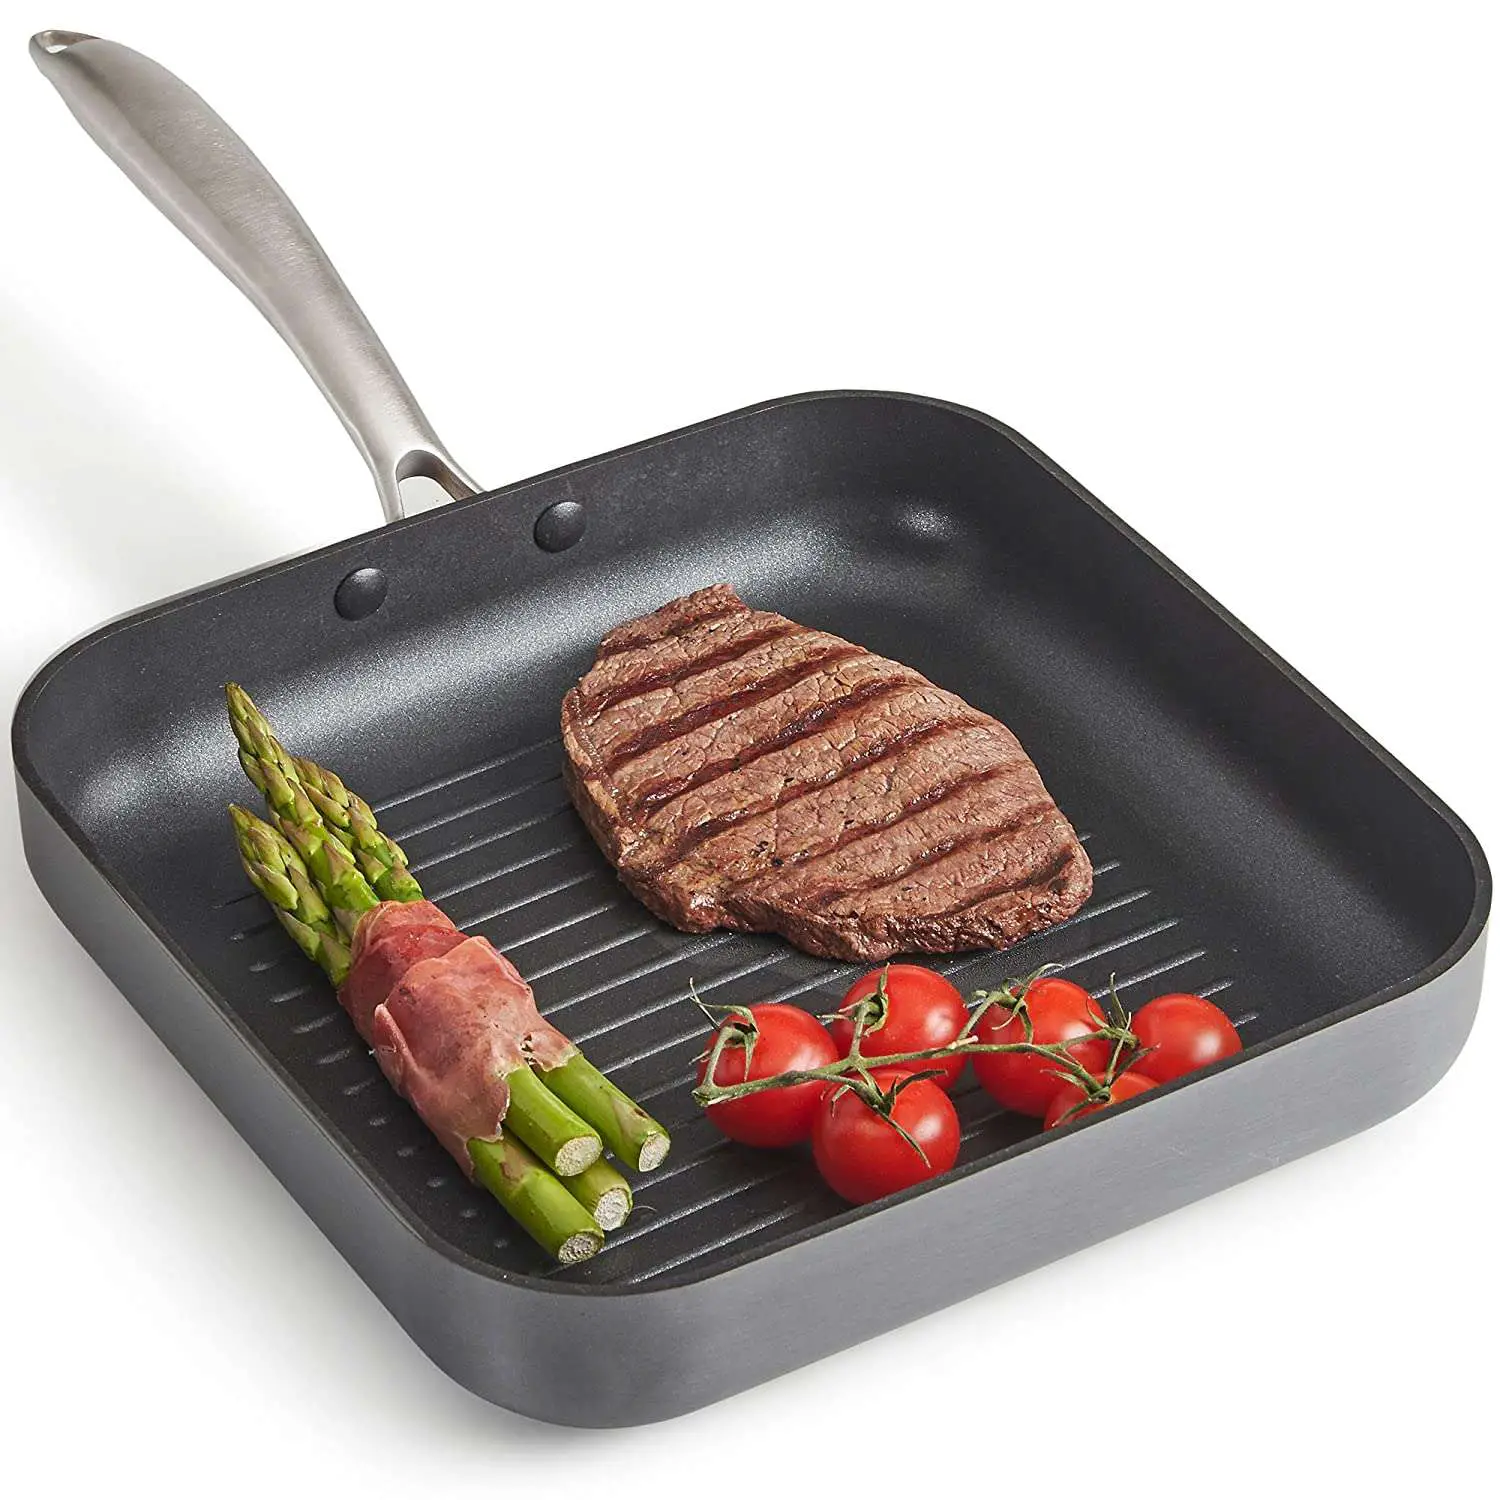 Best grill pan for ceramic cooktop